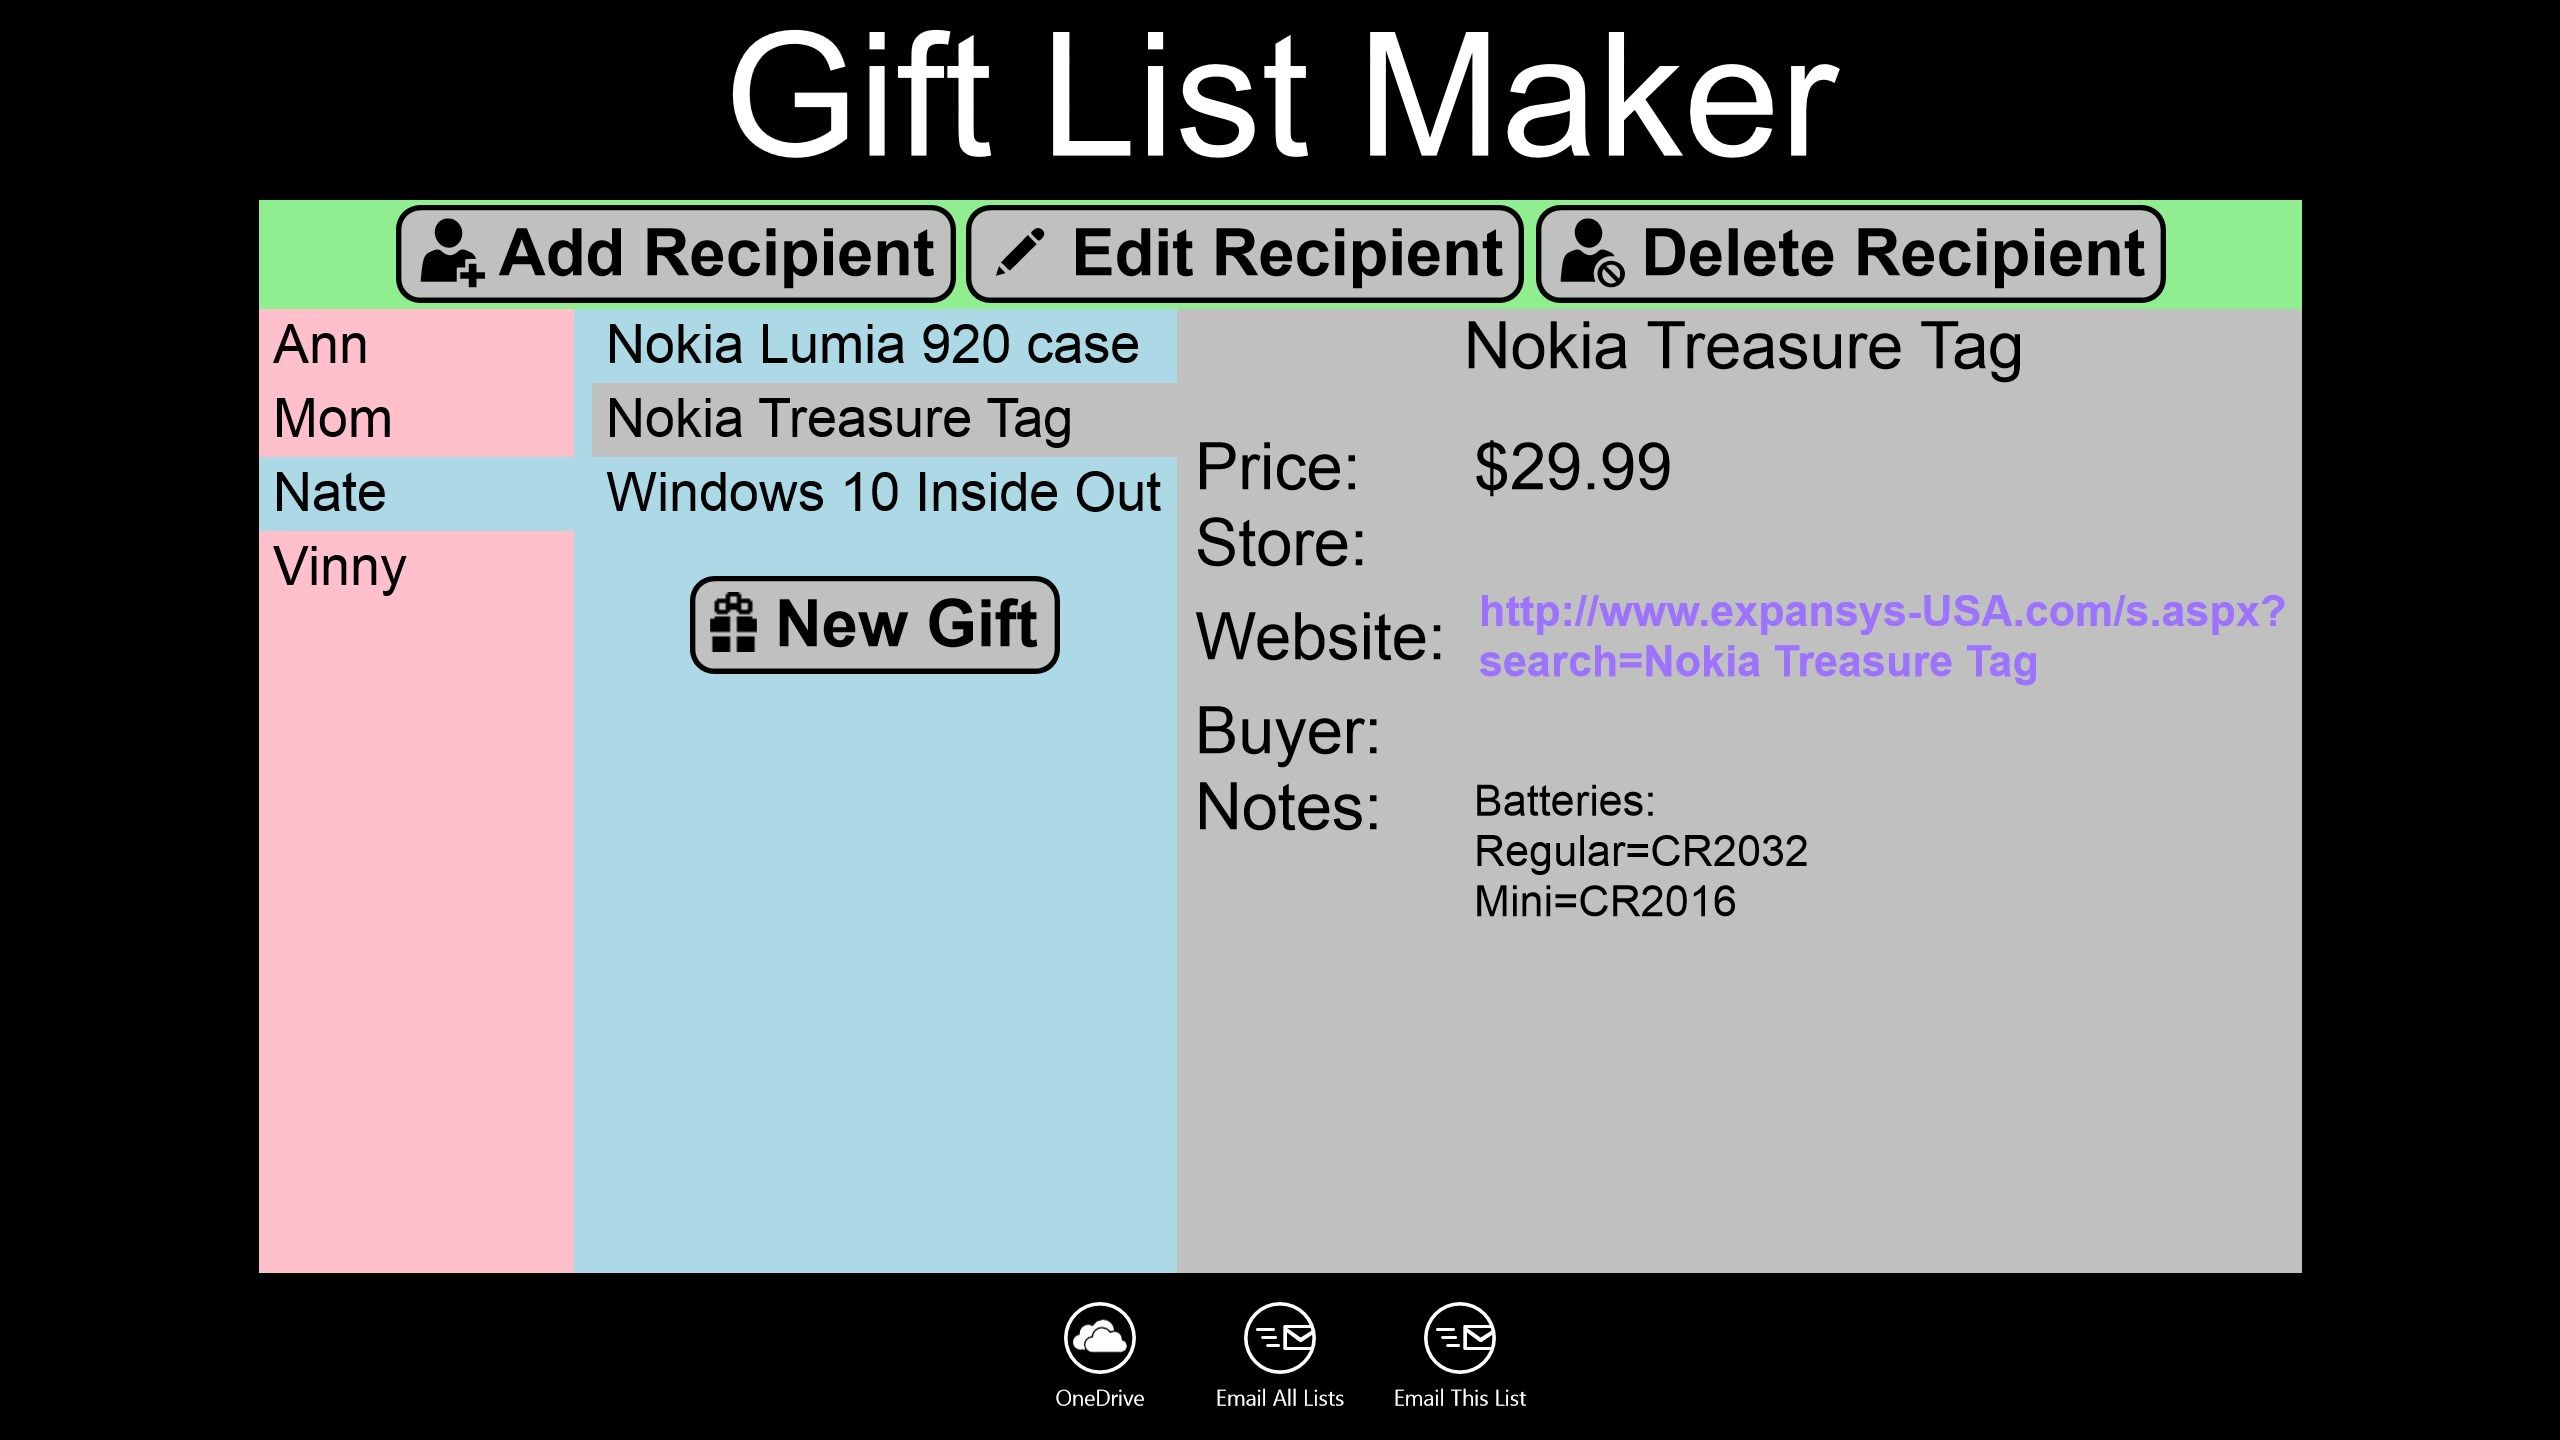 You can quickly switch between recipients & view gifts, including a clickable link to the gift's website